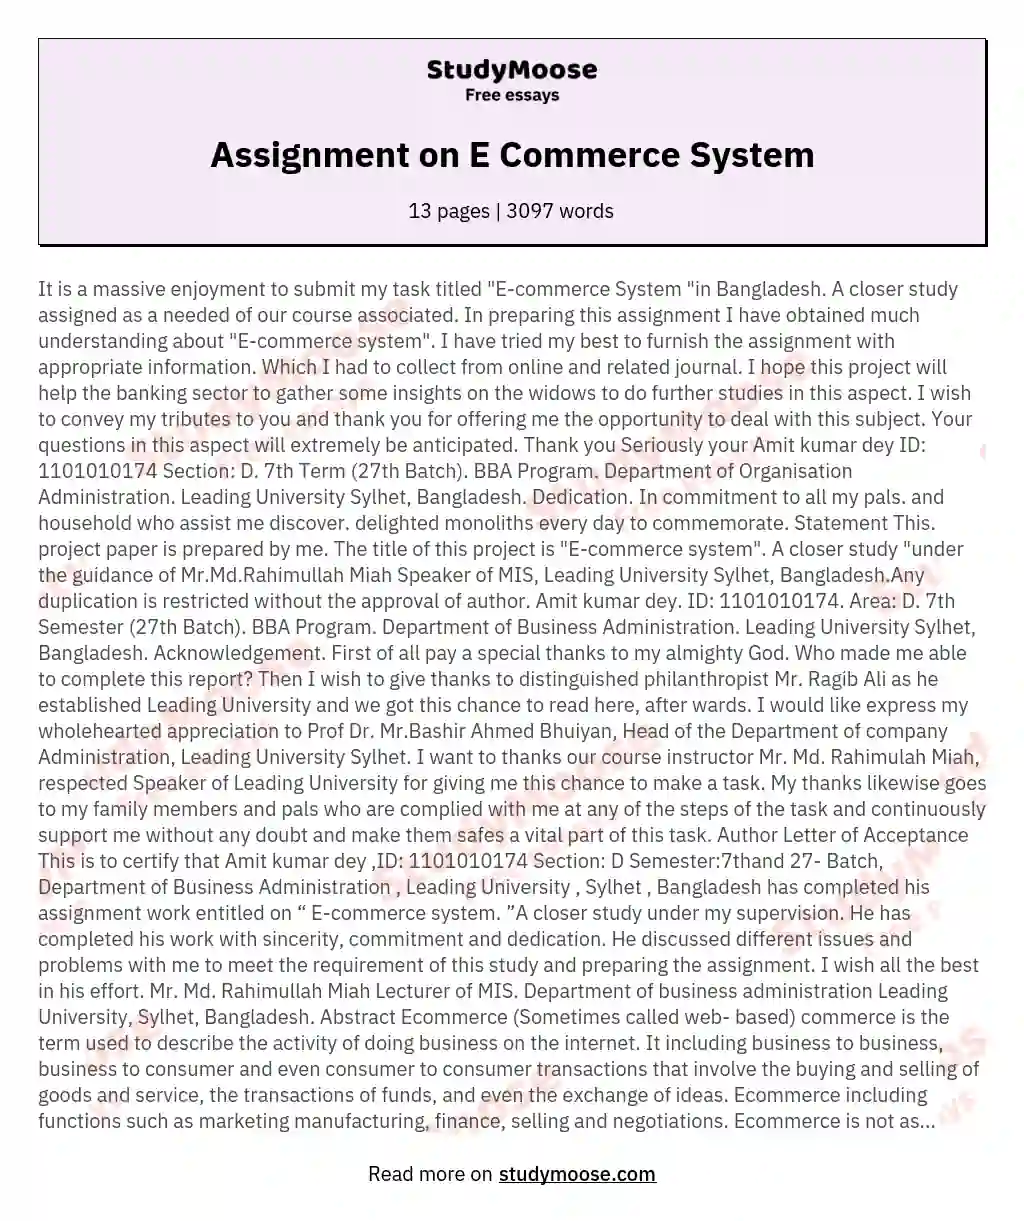 introduction for e commerce assignment